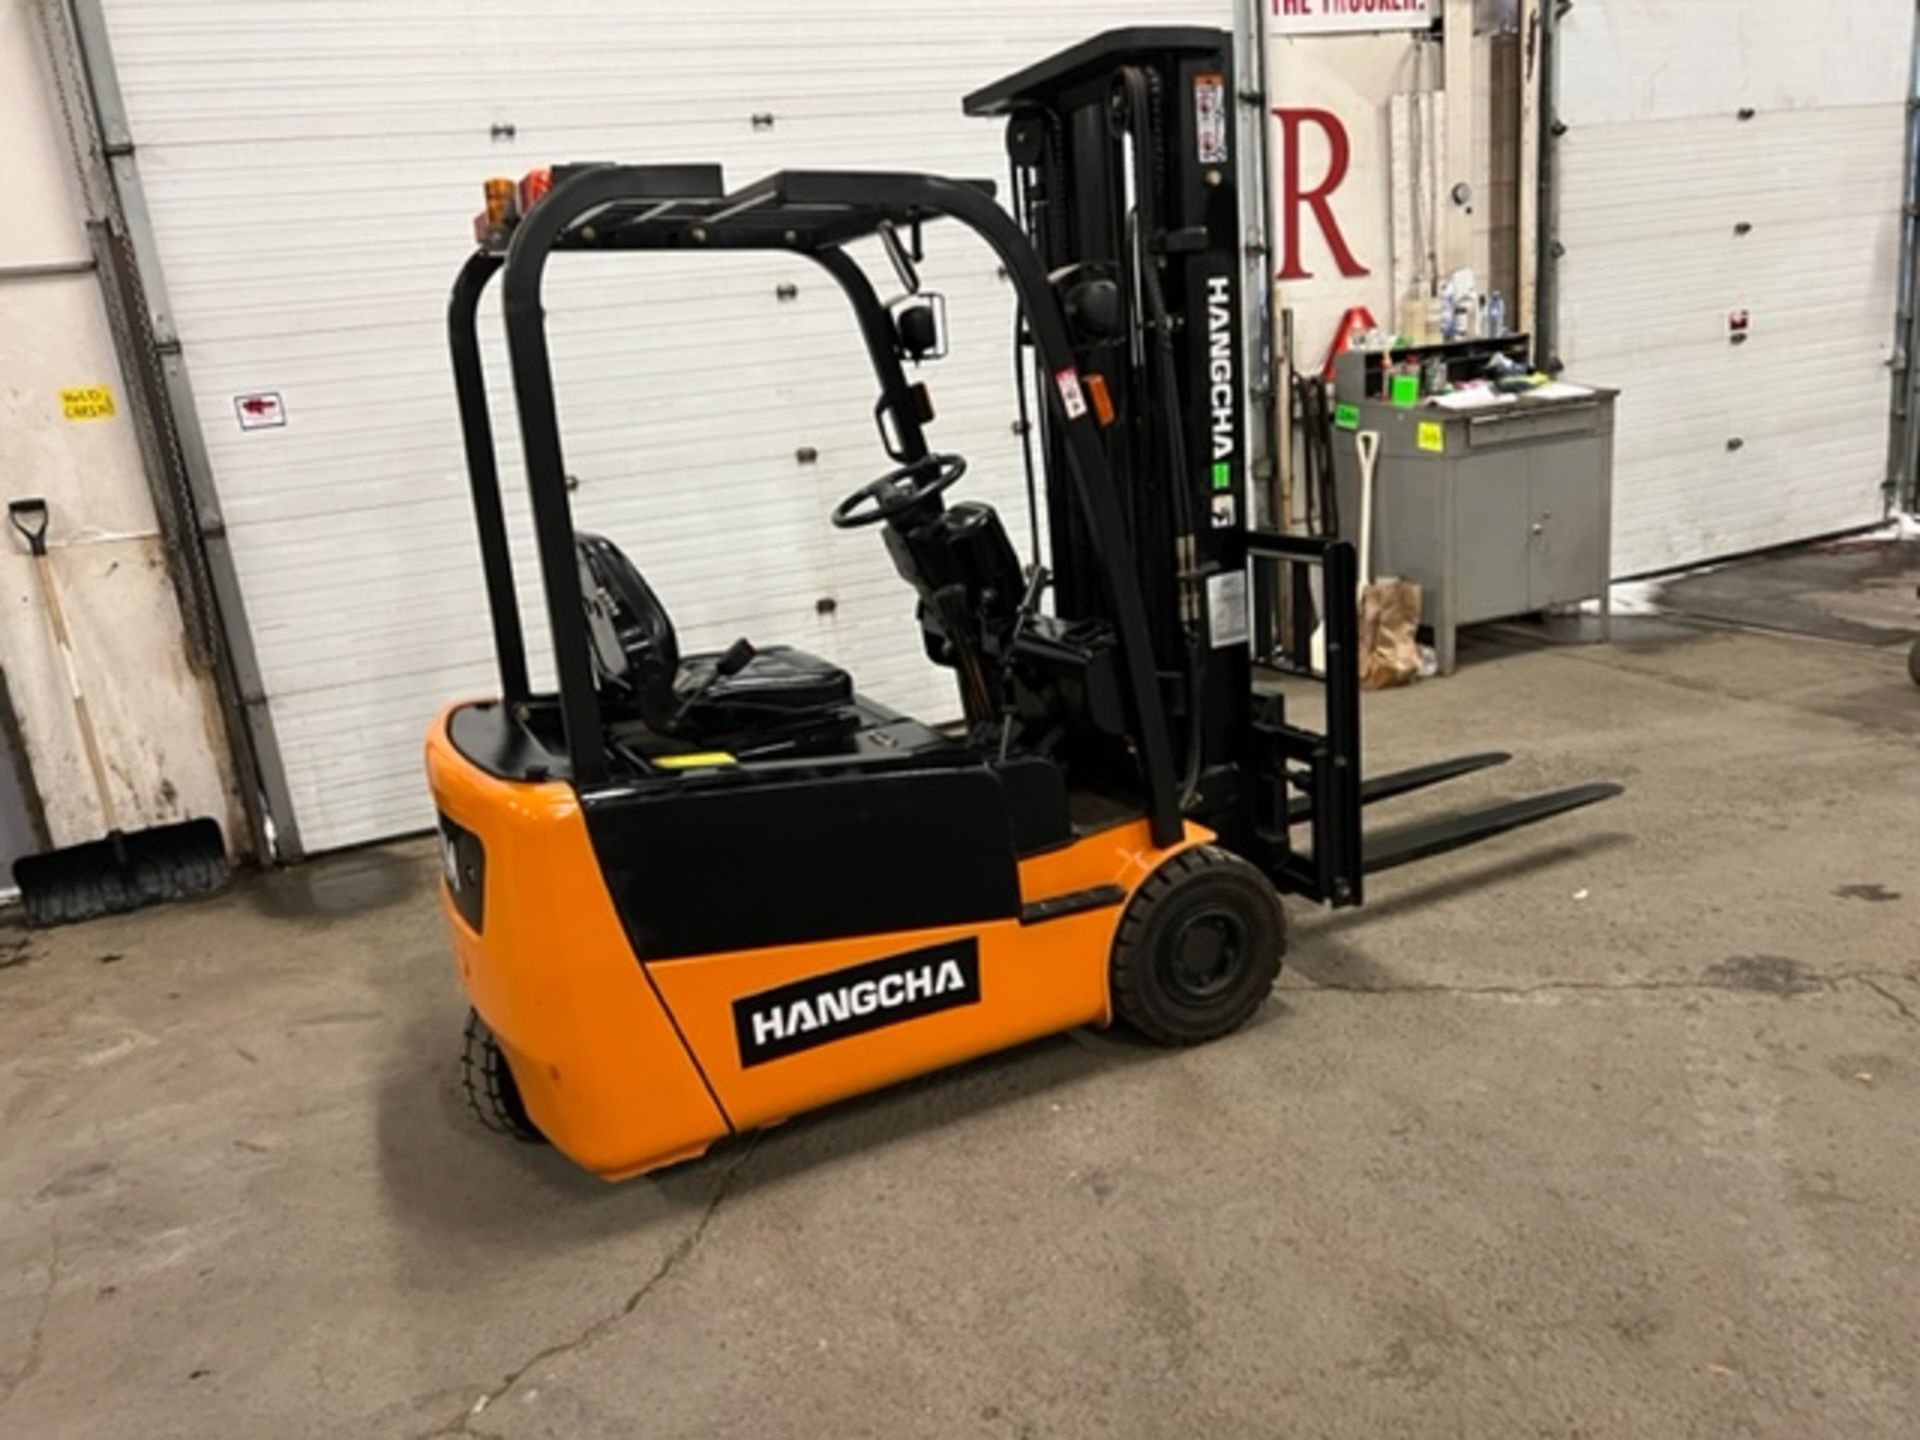 FREE CUSTOMS - MINT 2019 Hangcha Magnum 3-wheel Forklift Electric 4000lbs capacity with 2022 NEW